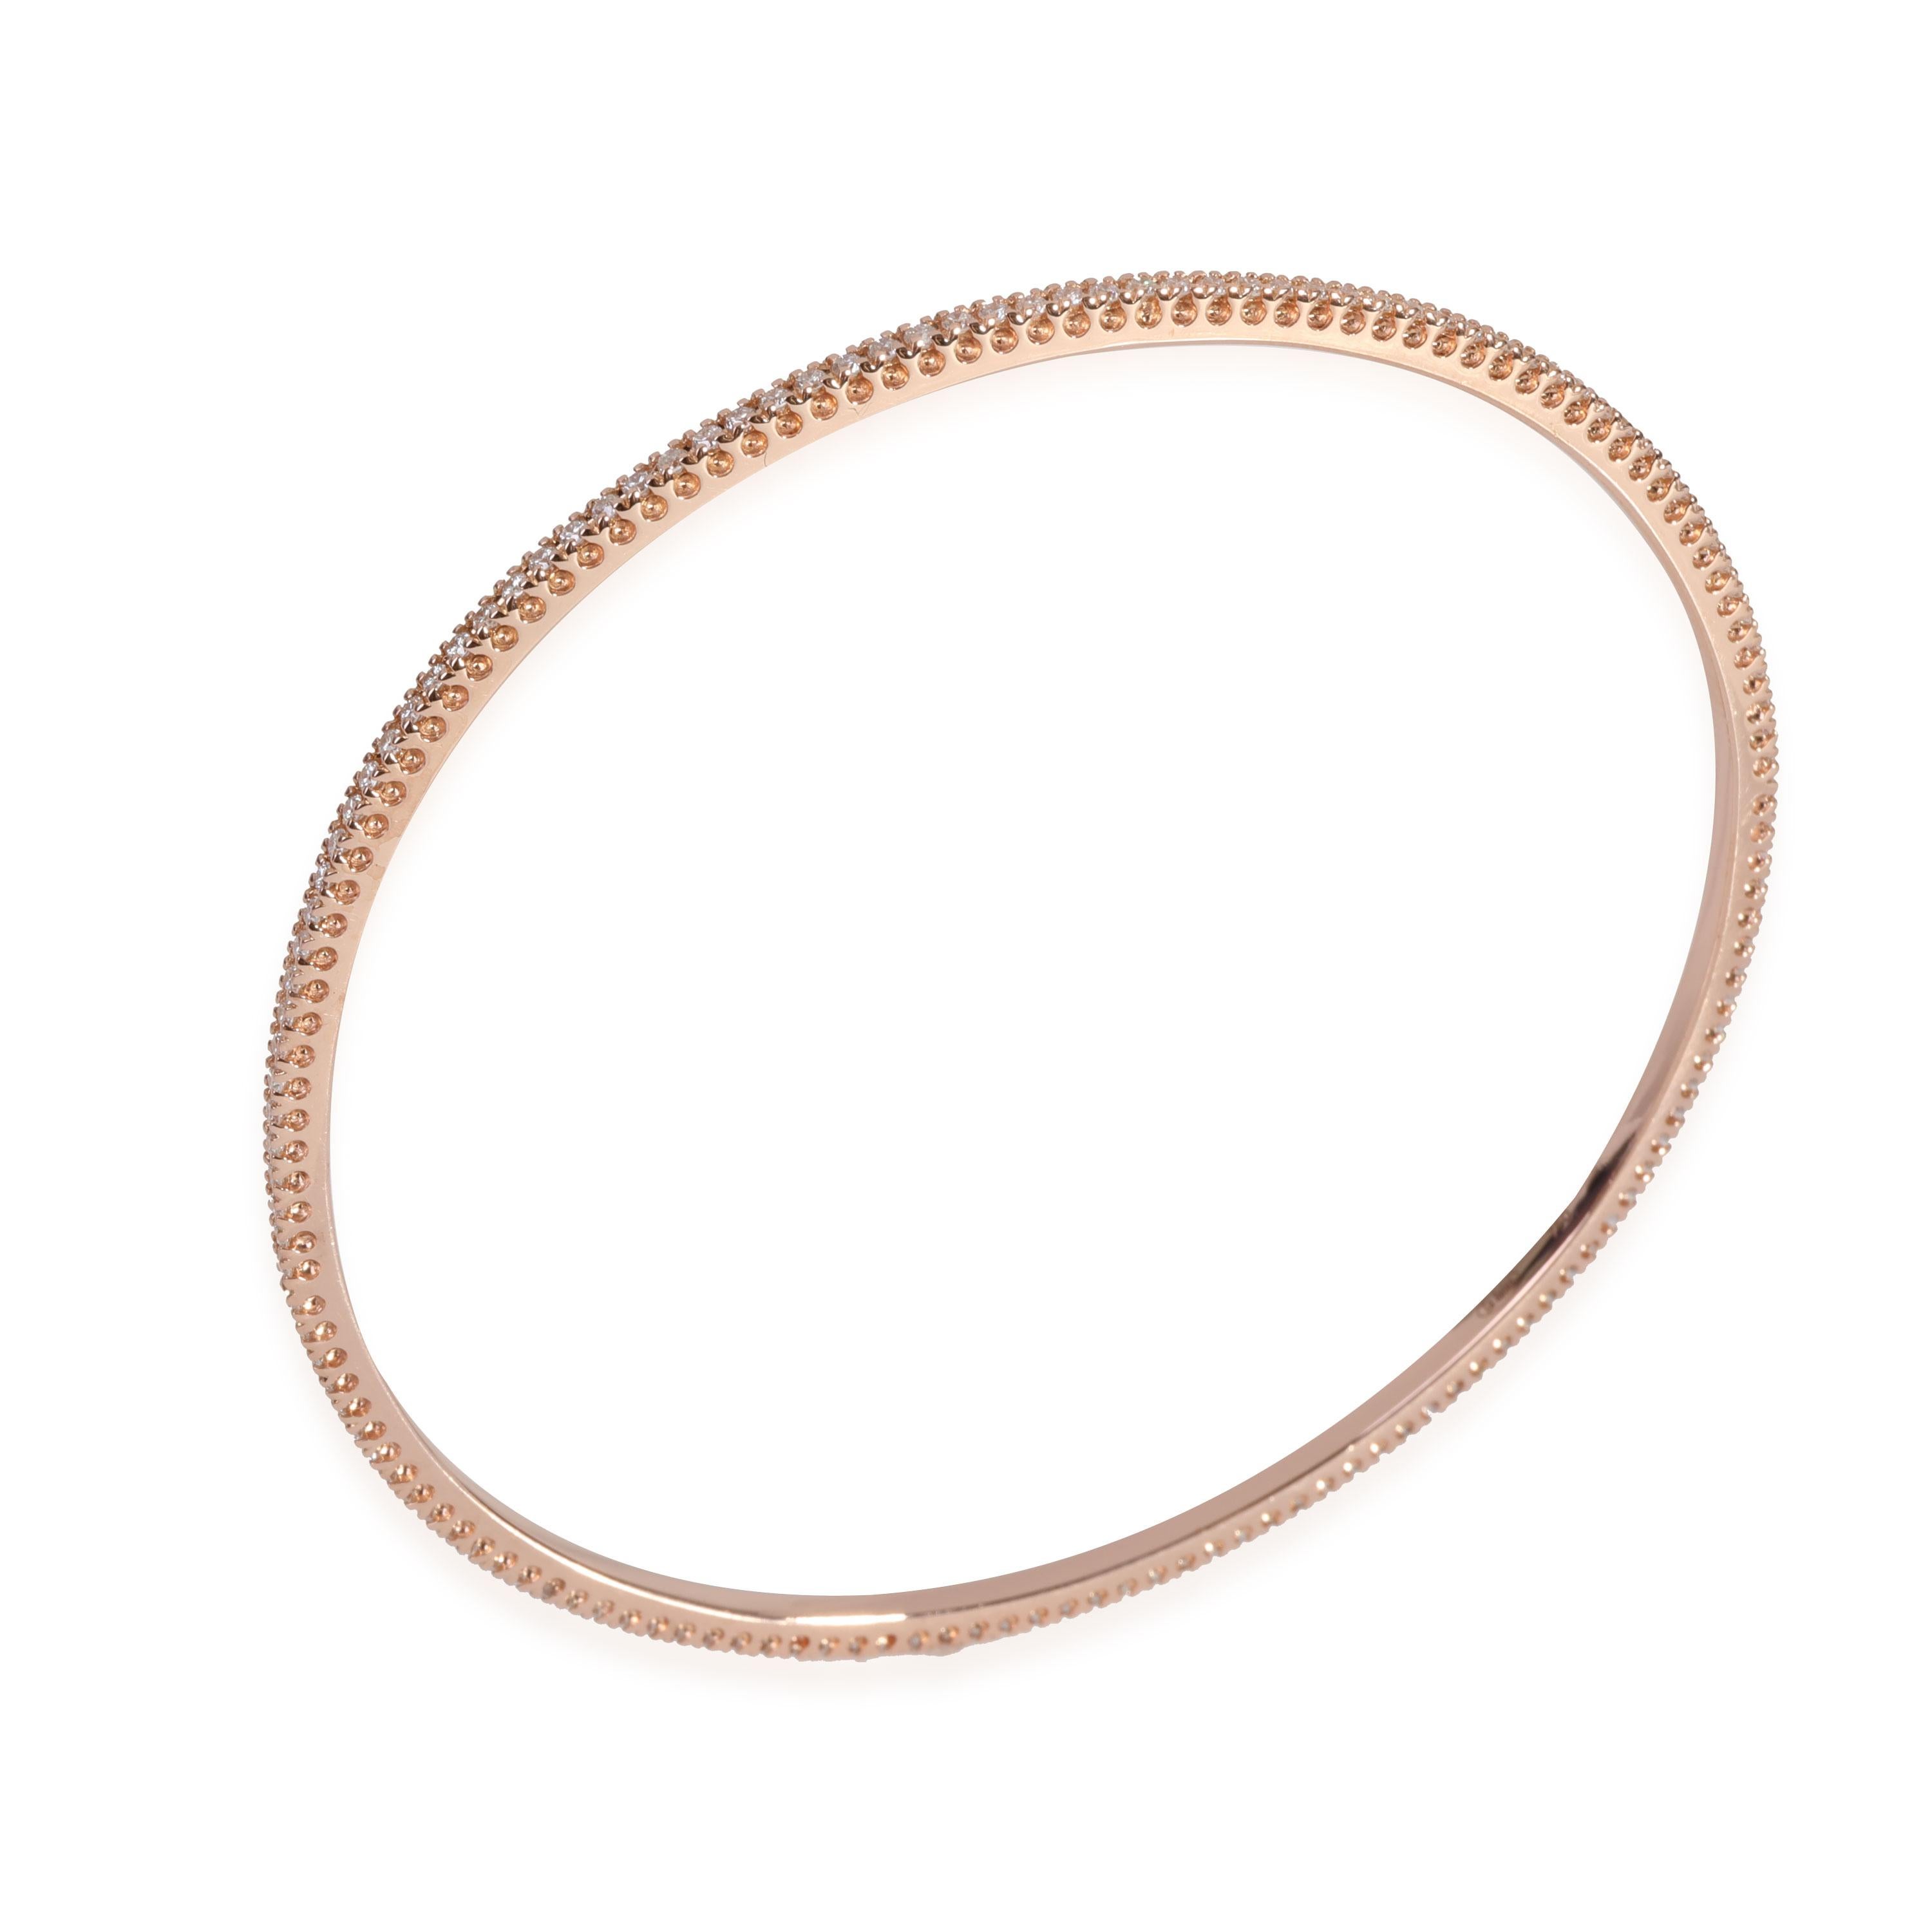 La Reina Diamond Bangle in 18k Rose Gold 1 CTW

PRIMARY DETAILS
SKU: 118053
Listing Title: La Reina Diamond Bangle in 18k Rose Gold 1 CTW
Condition Description: Retails for 3500 USD. In excellent condition and recently polished. Fits a 7.75 inch